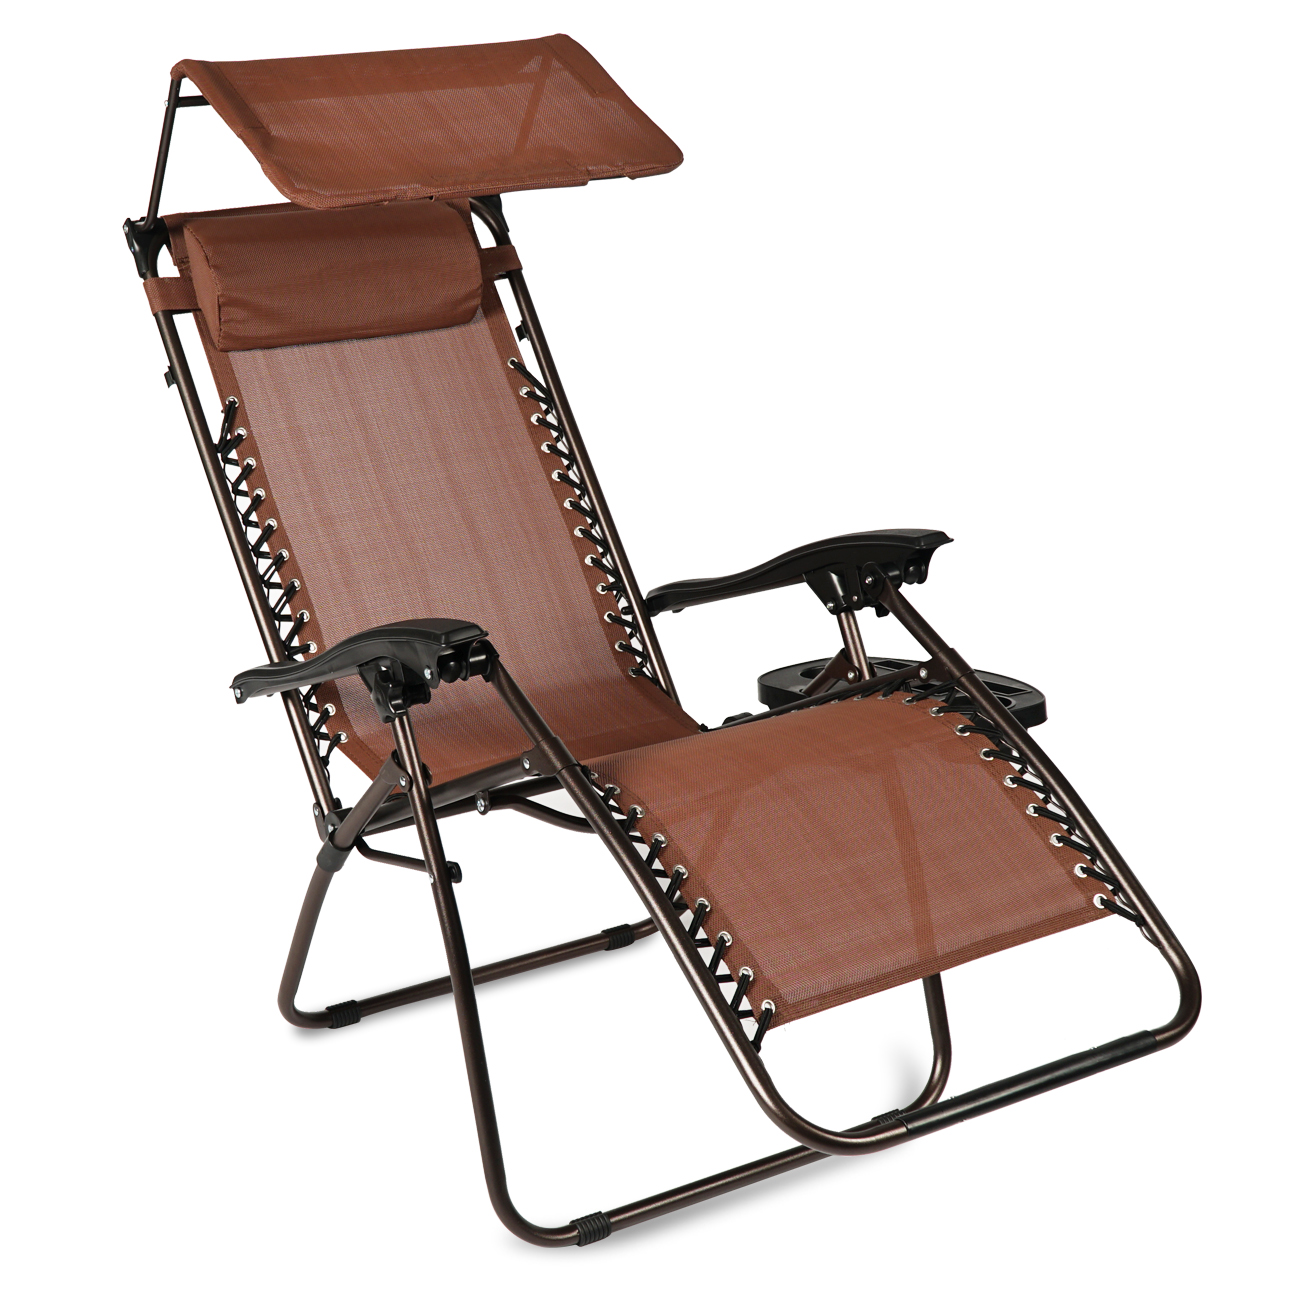 BELLEZE Zero Gravity Chair Shade Blocker Folding Chair Folding Chair Bungee Suspension Canopy Patio Brown - image 1 of 7